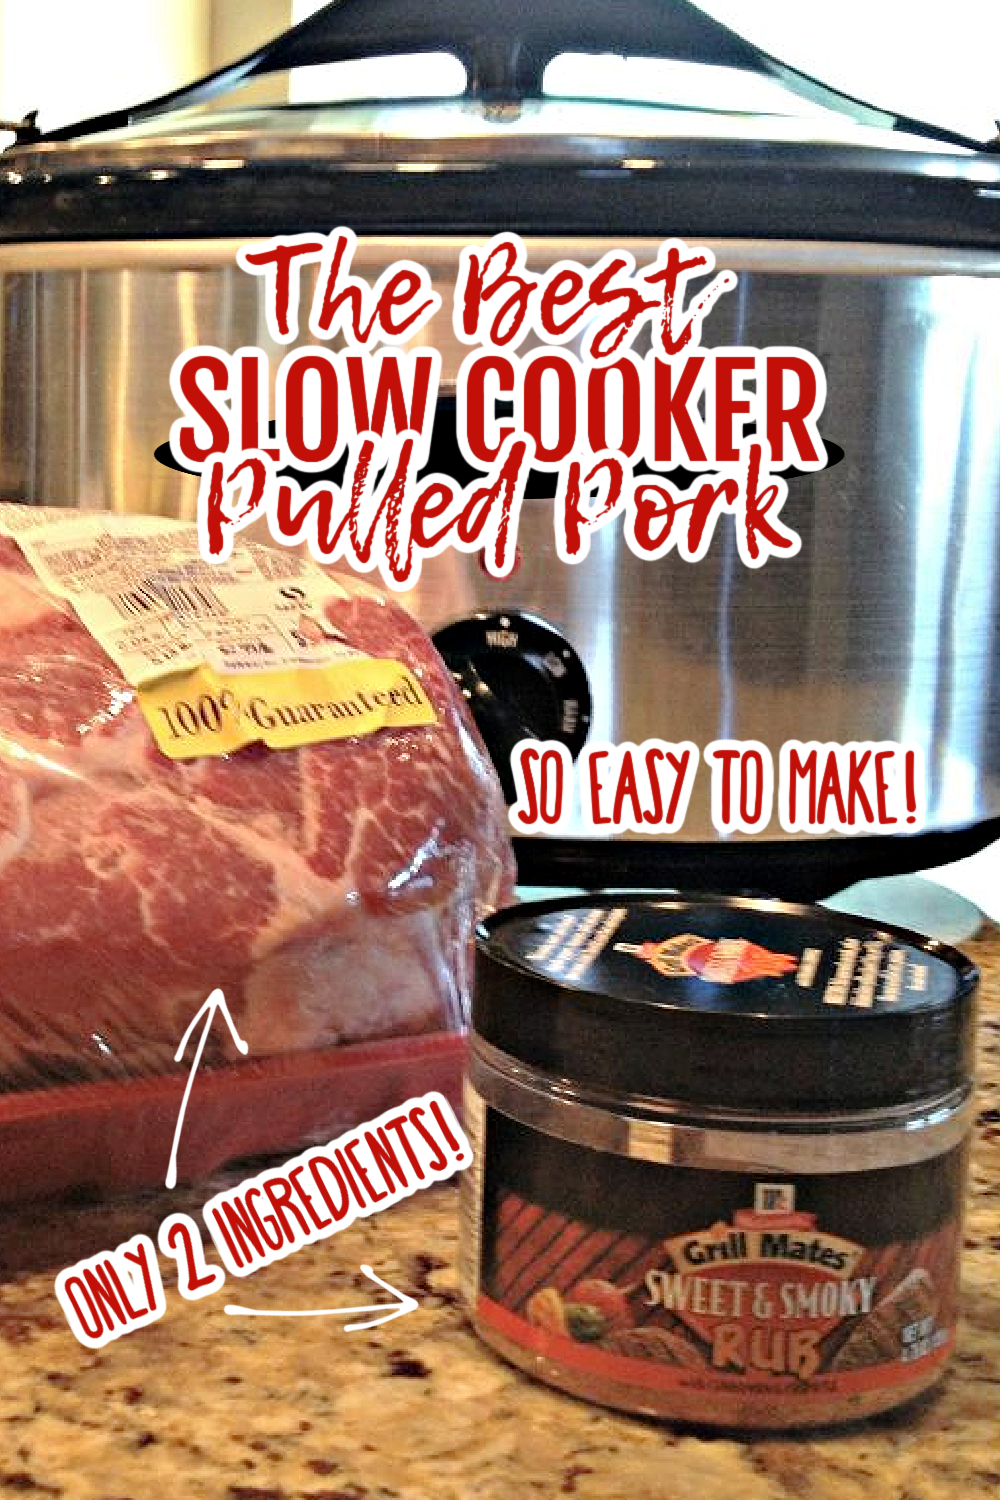 This is a photo showing the two ingredients needed to make the pork - pork shoulder in store packaging and a container of sweet and smoky rub. 